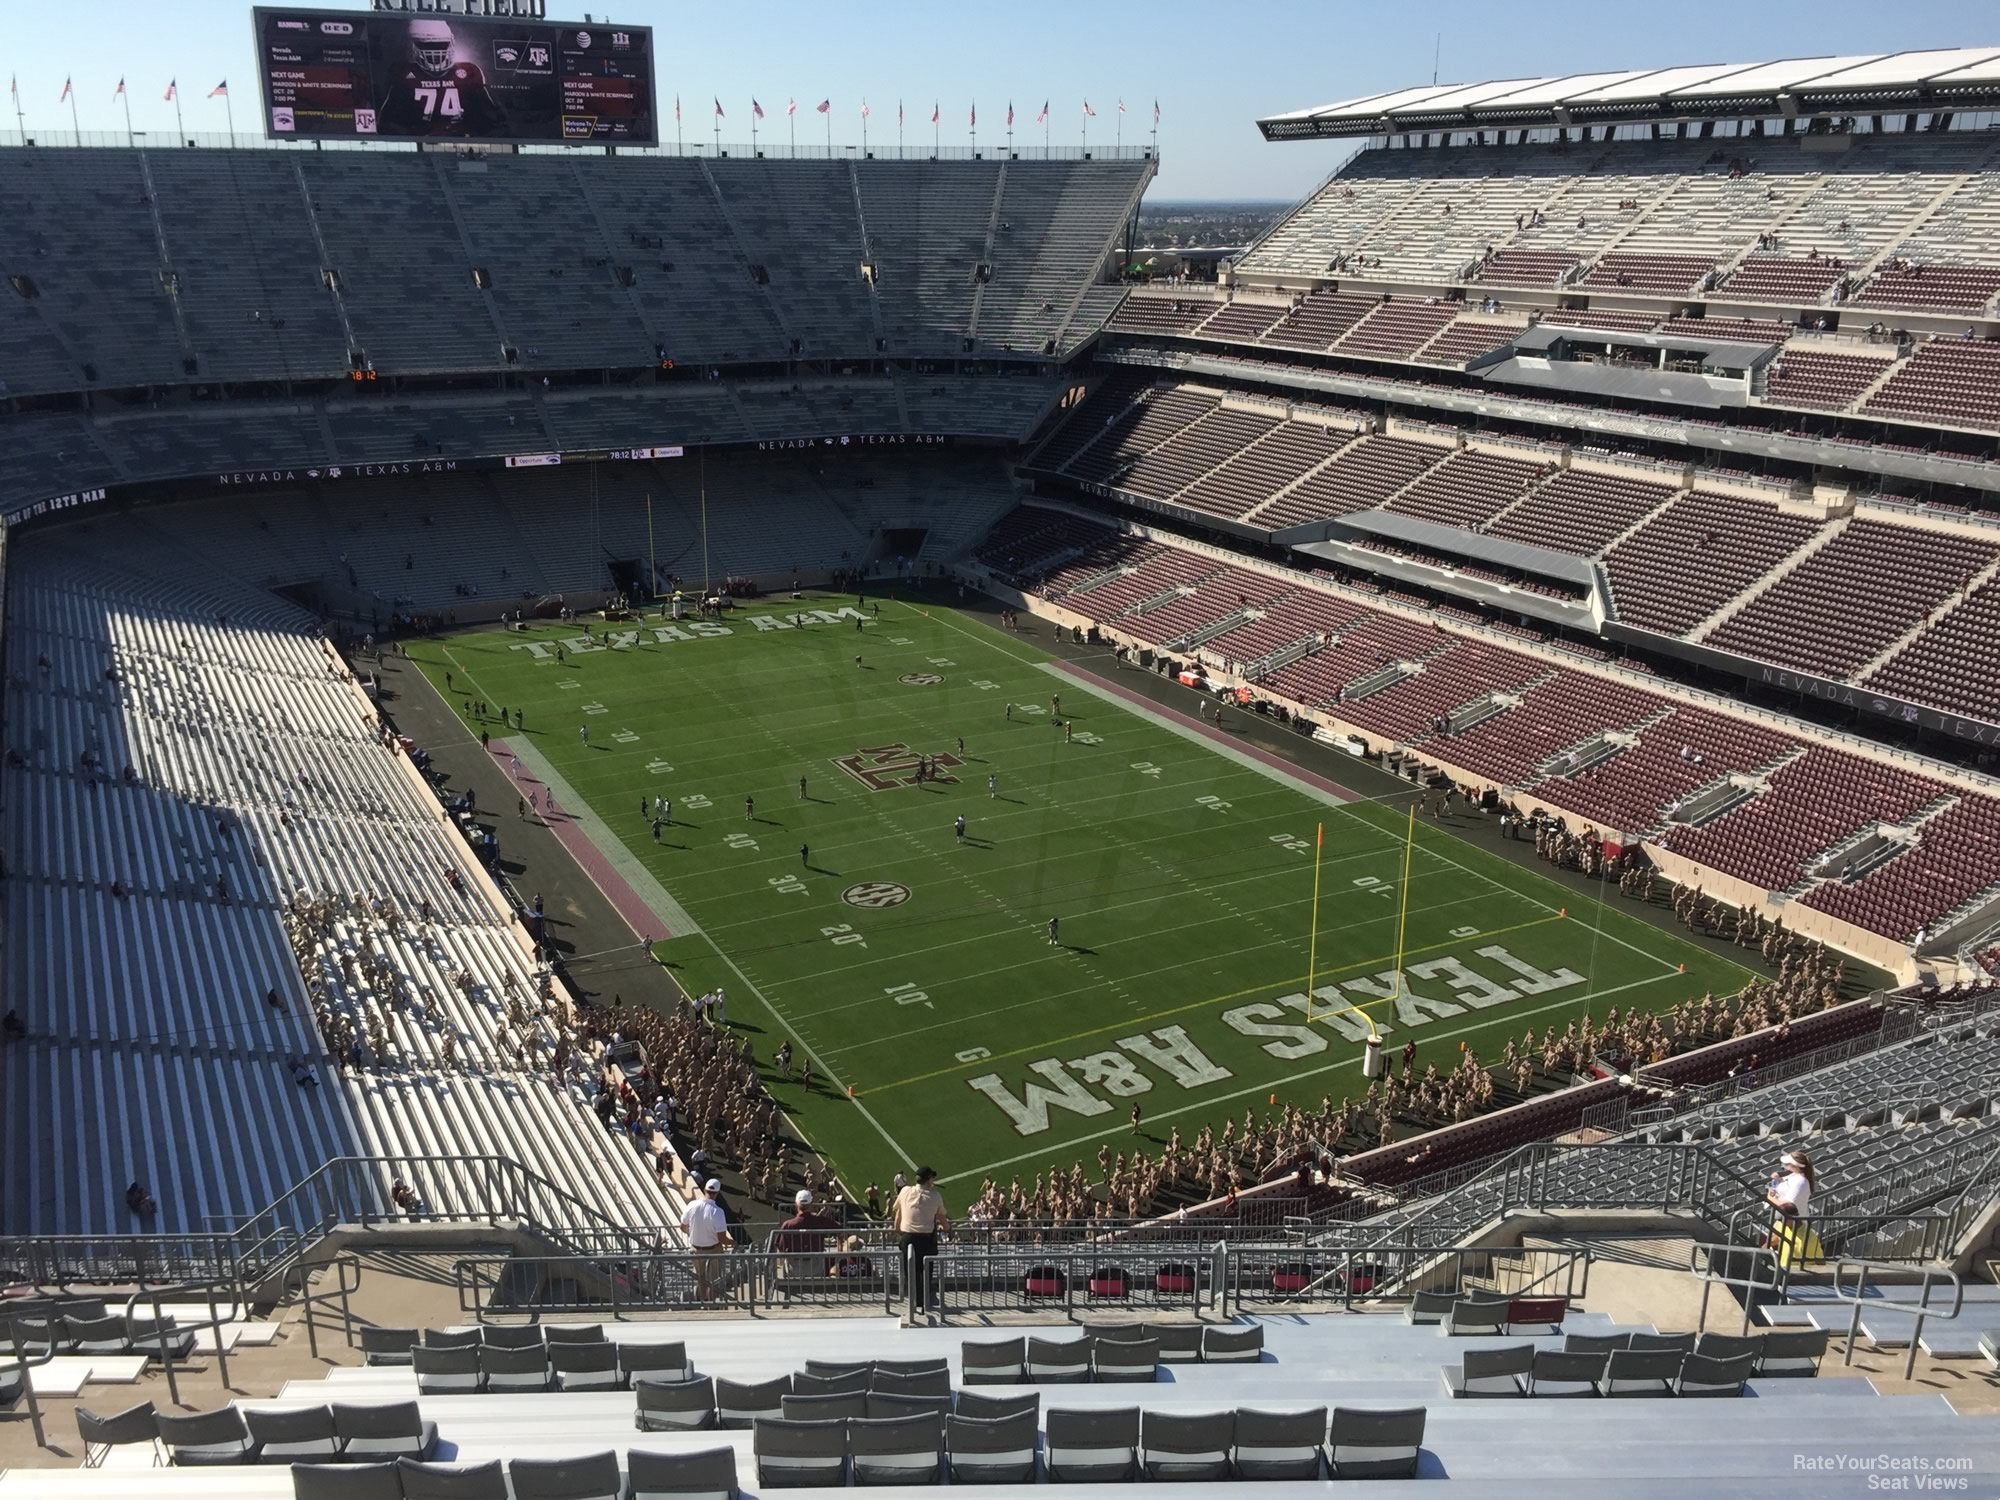 section 420, row 20 seat view  - kyle field